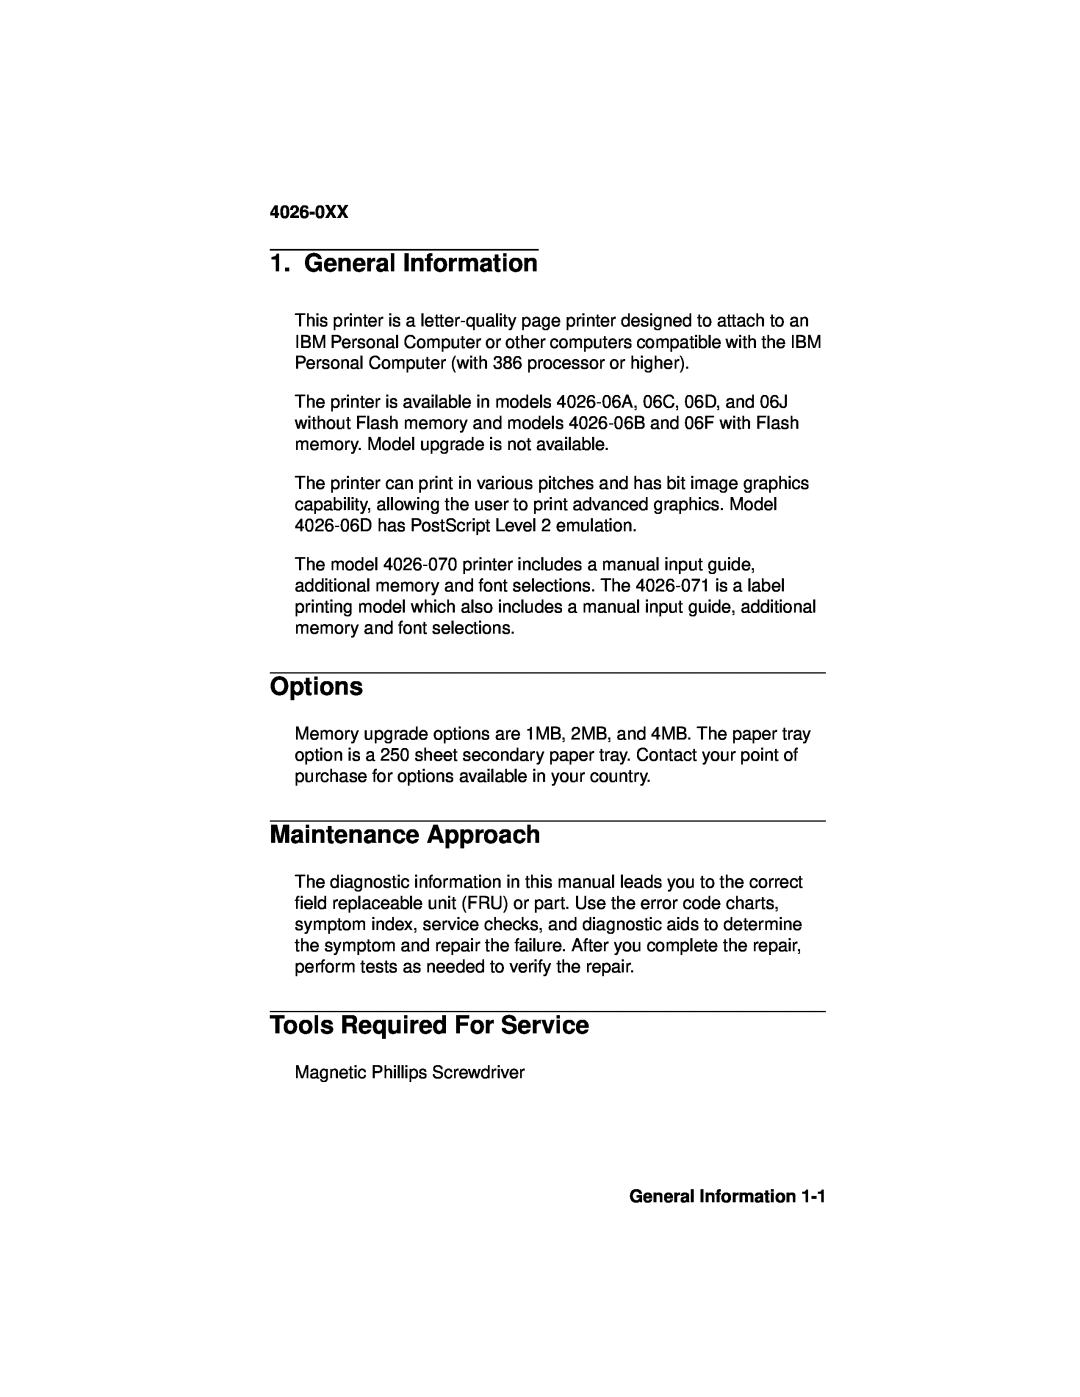 Lexmark OptraTM manual General Information, Options, Maintenance Approach, Tools Required For Service, 4026-0XX 